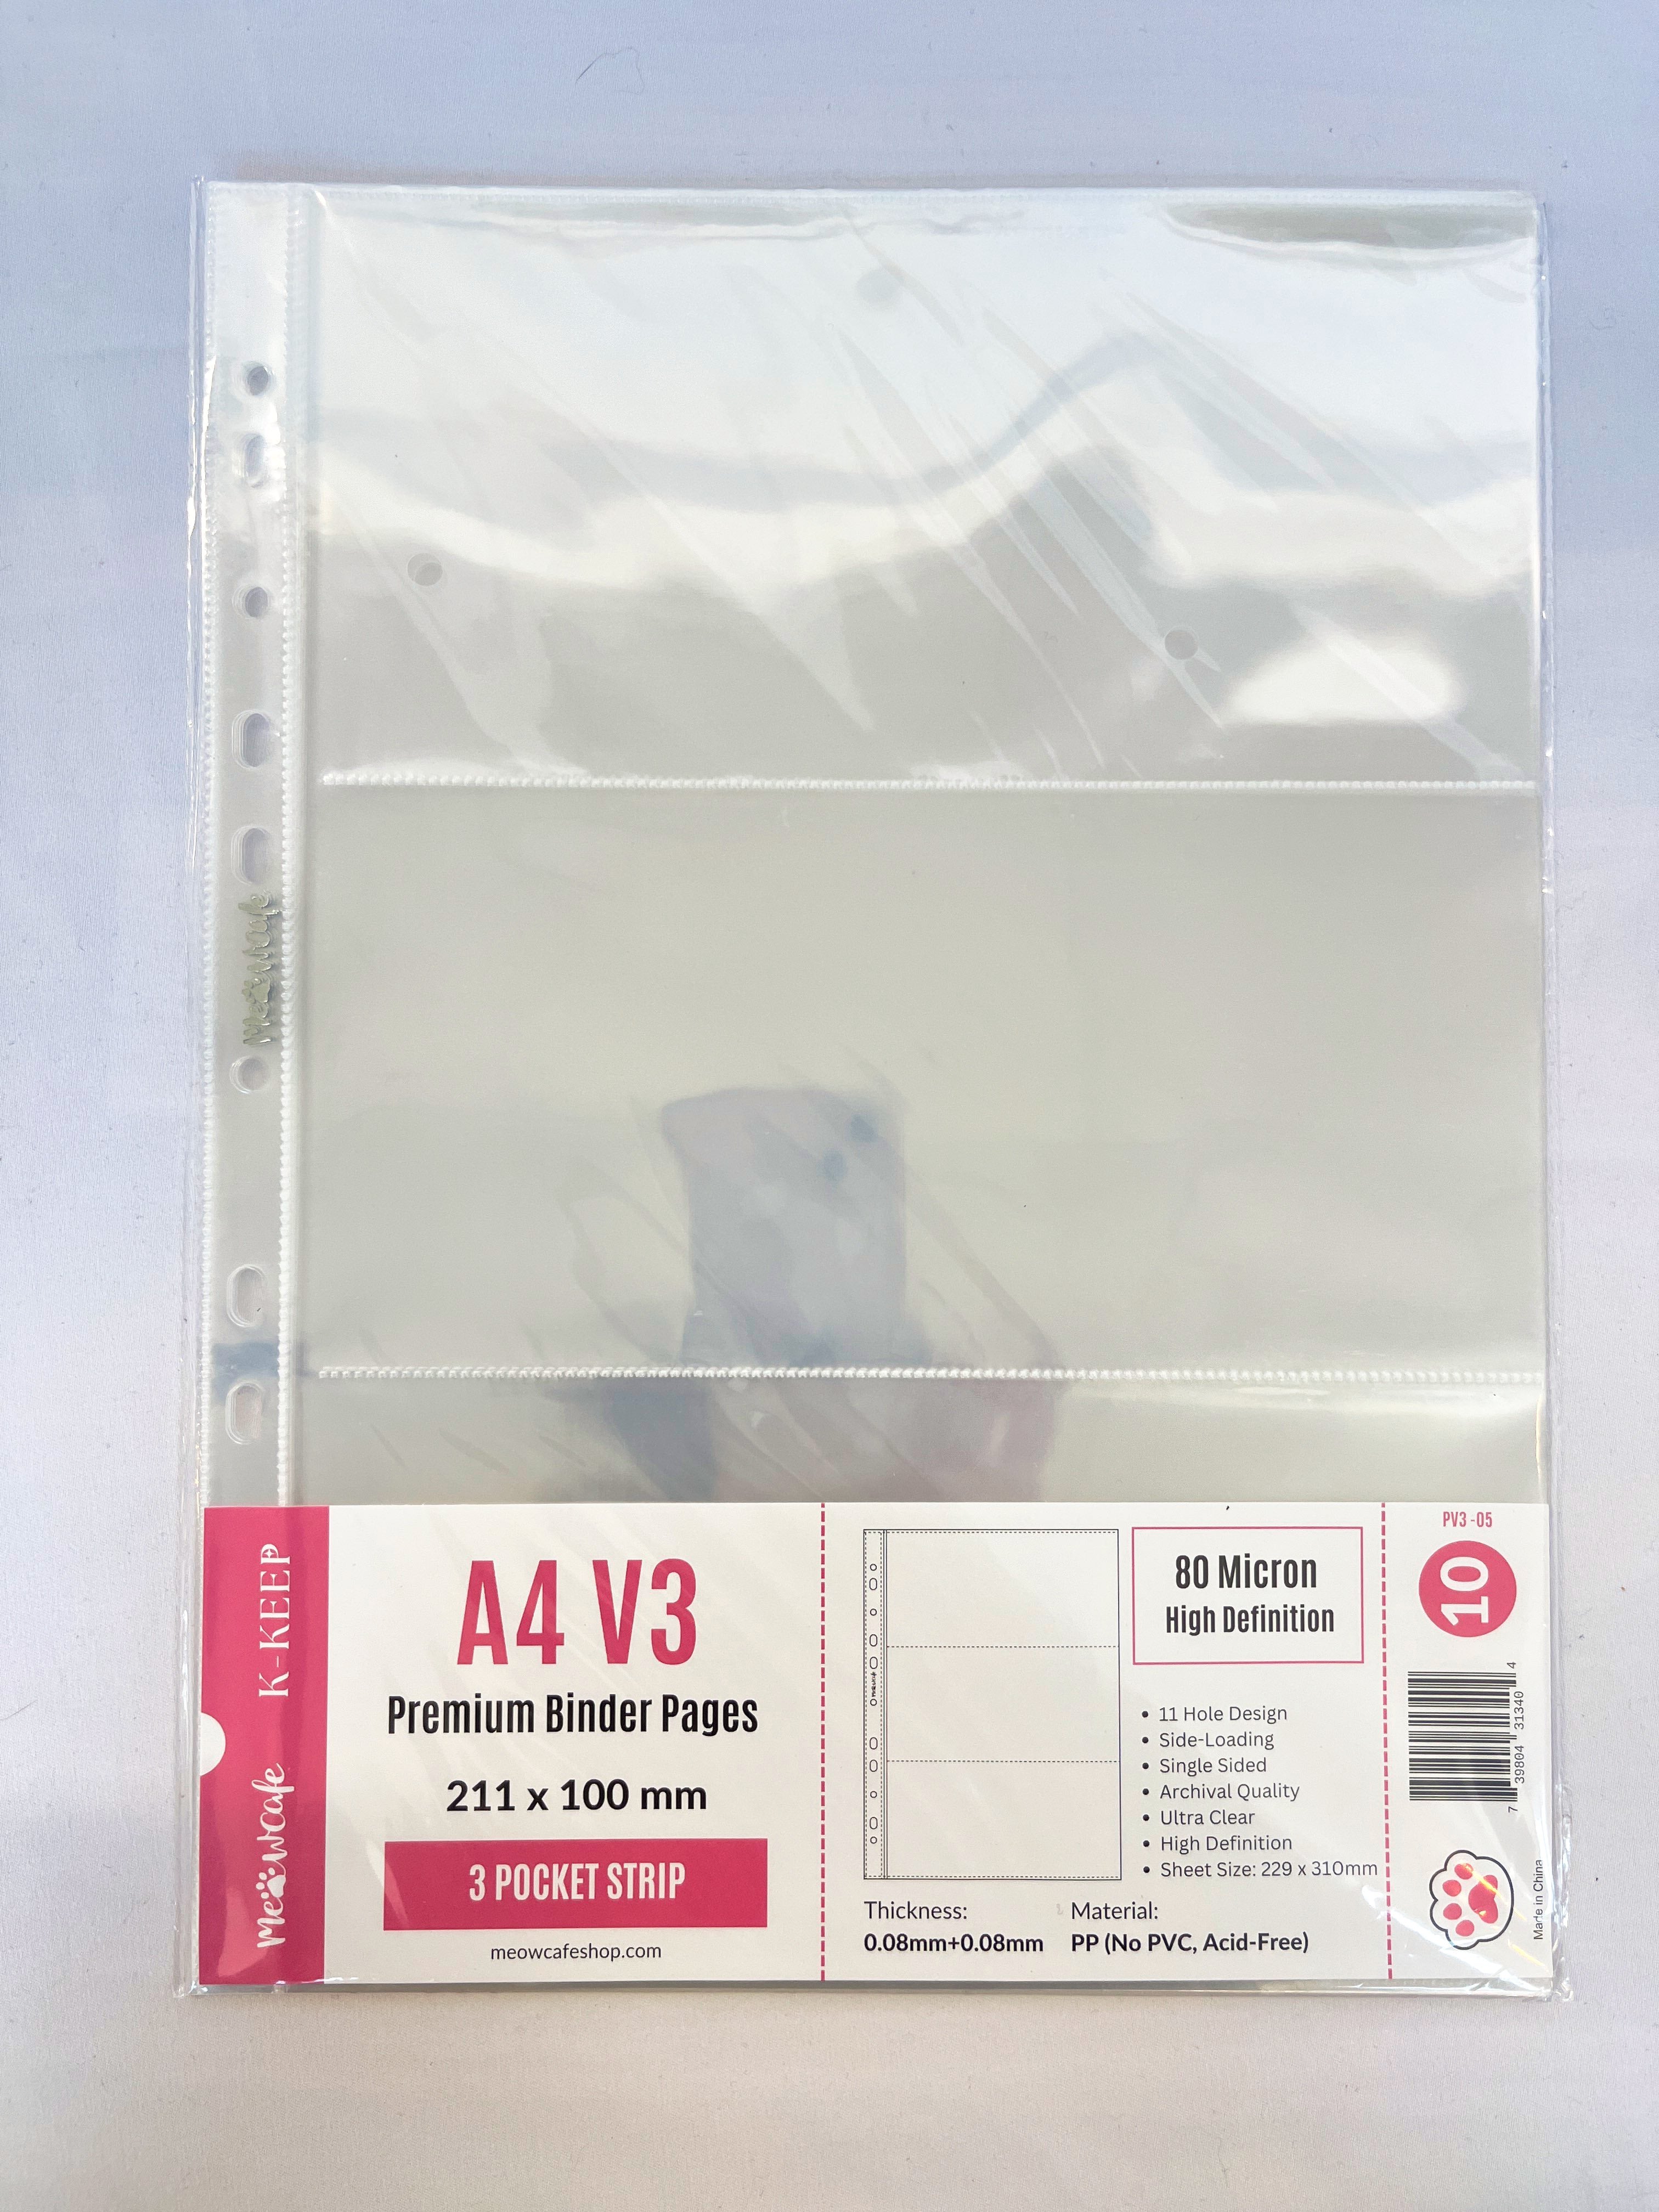 K-KEEP [A4 V3] -  3 Pocket (Strip)- 11 Holes Premium Binder Pages, 80 Micron Thick, High Definition (Pack of 10) - (PV3-05)